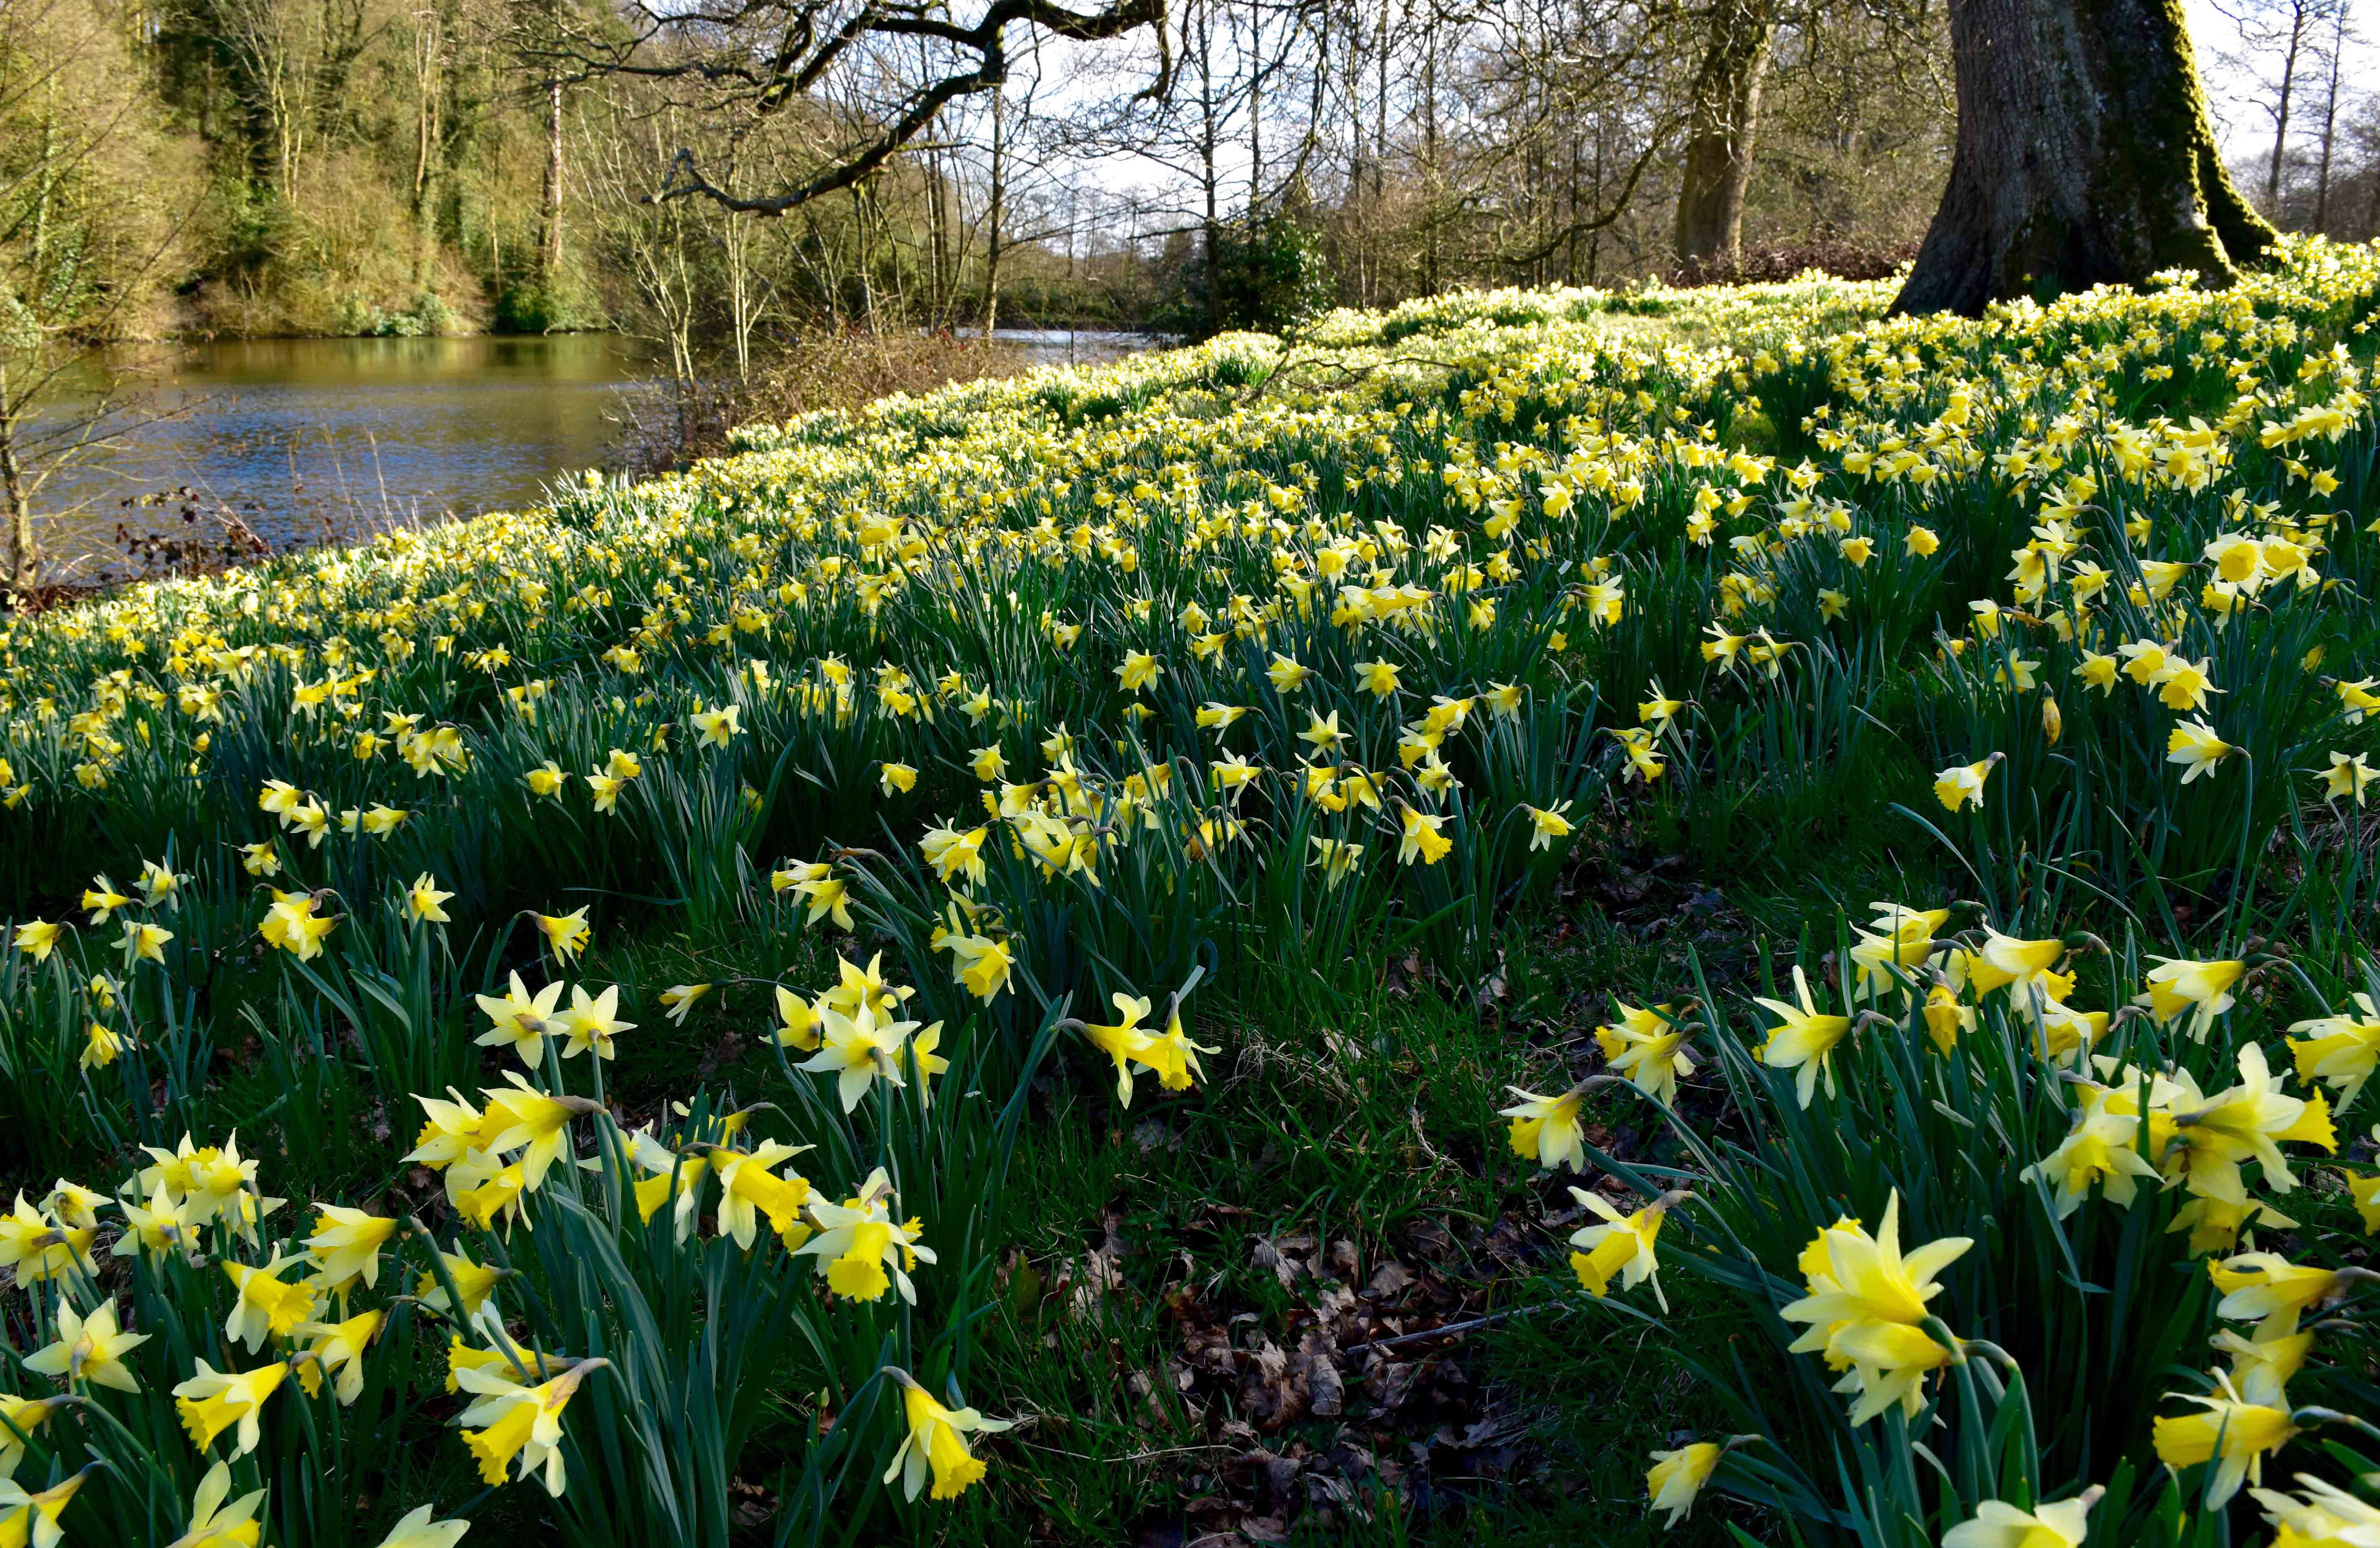 Best places to see daffodils in the UK